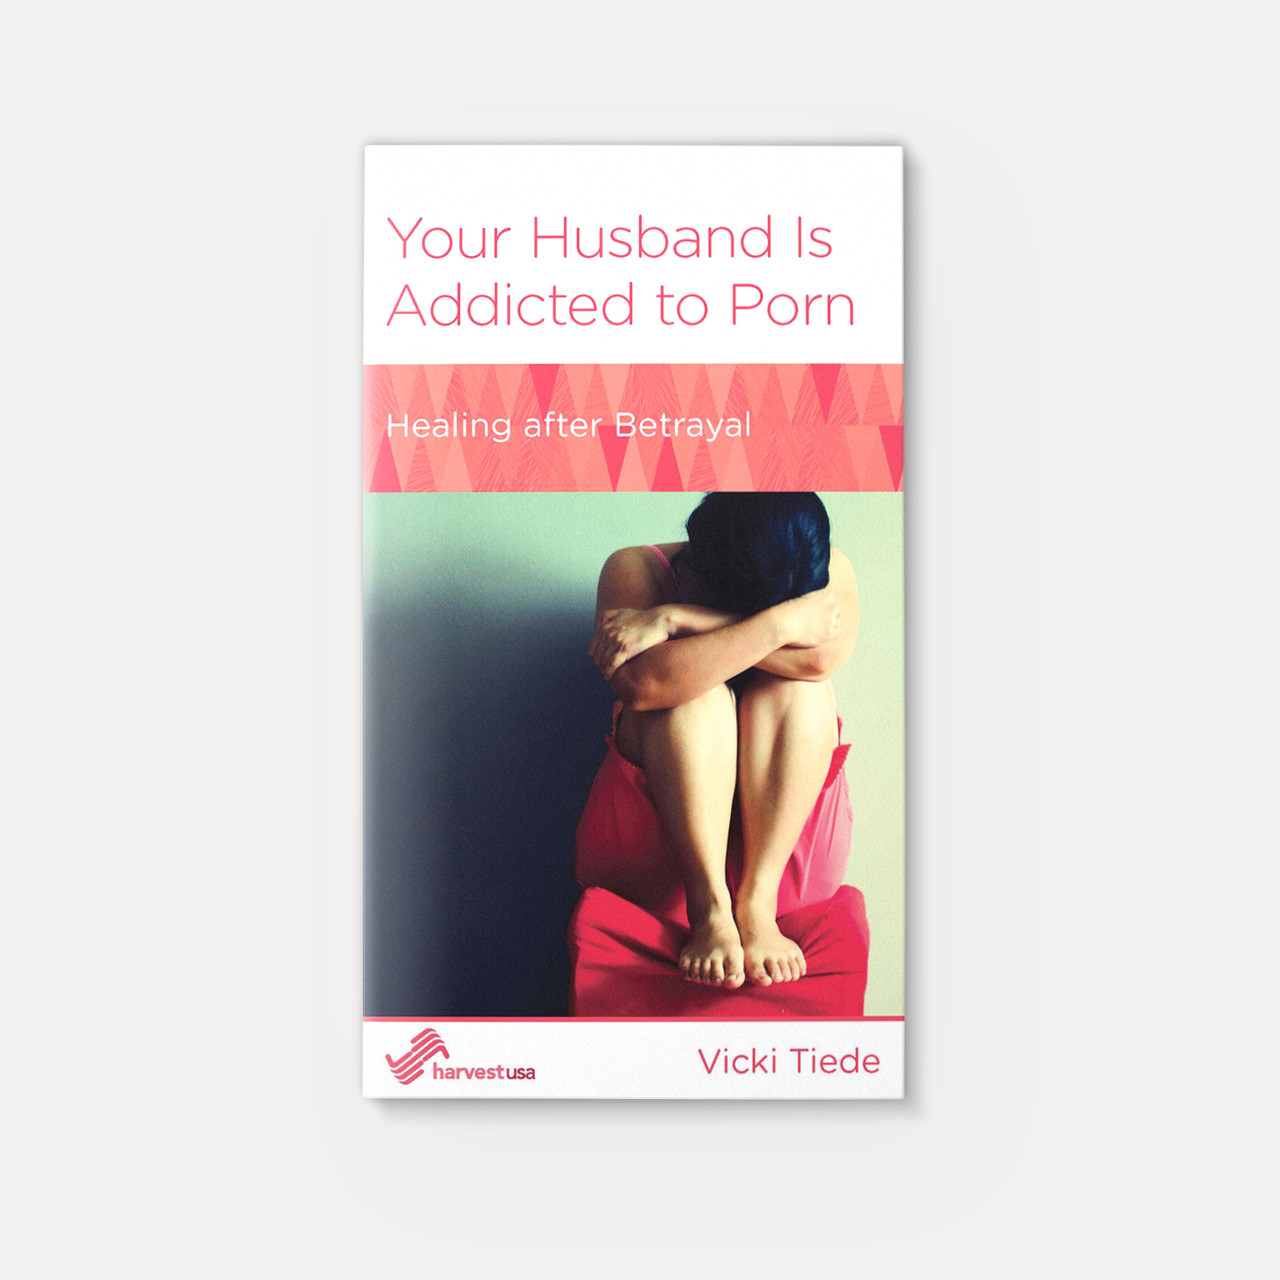 Where Is Your Husband - Buy Your Husband Is Addicted to Porn, Healing After Betrayal Book -  9781939946119 | New Growth Press